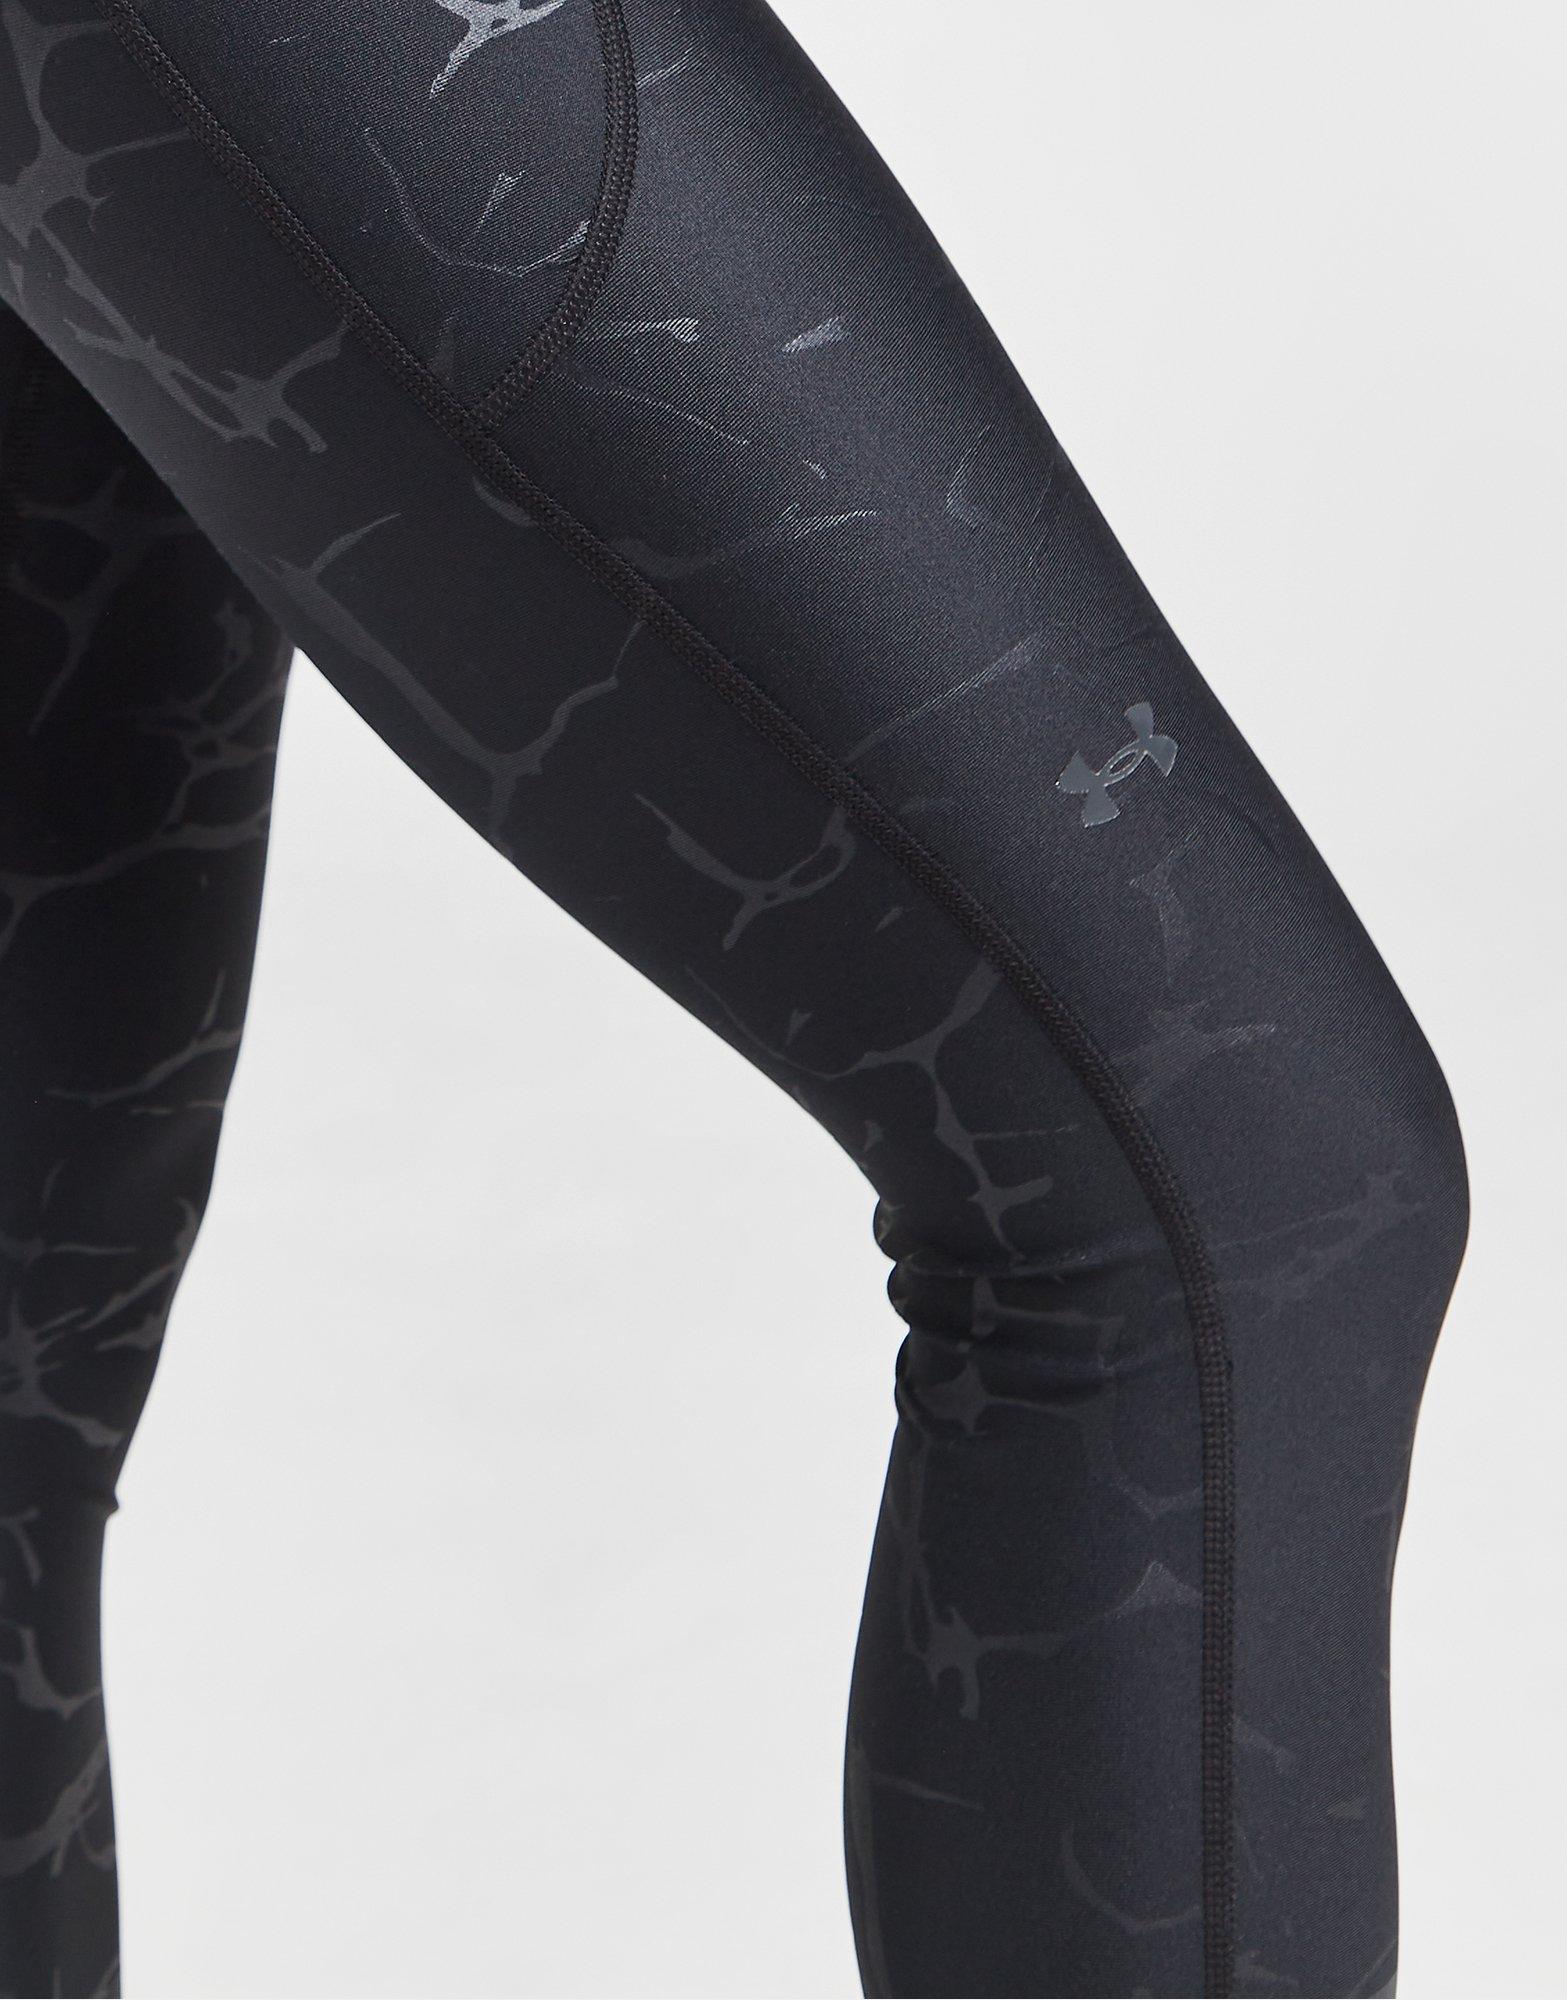 Black Under Armour Emboss Tights - JD Sports Global